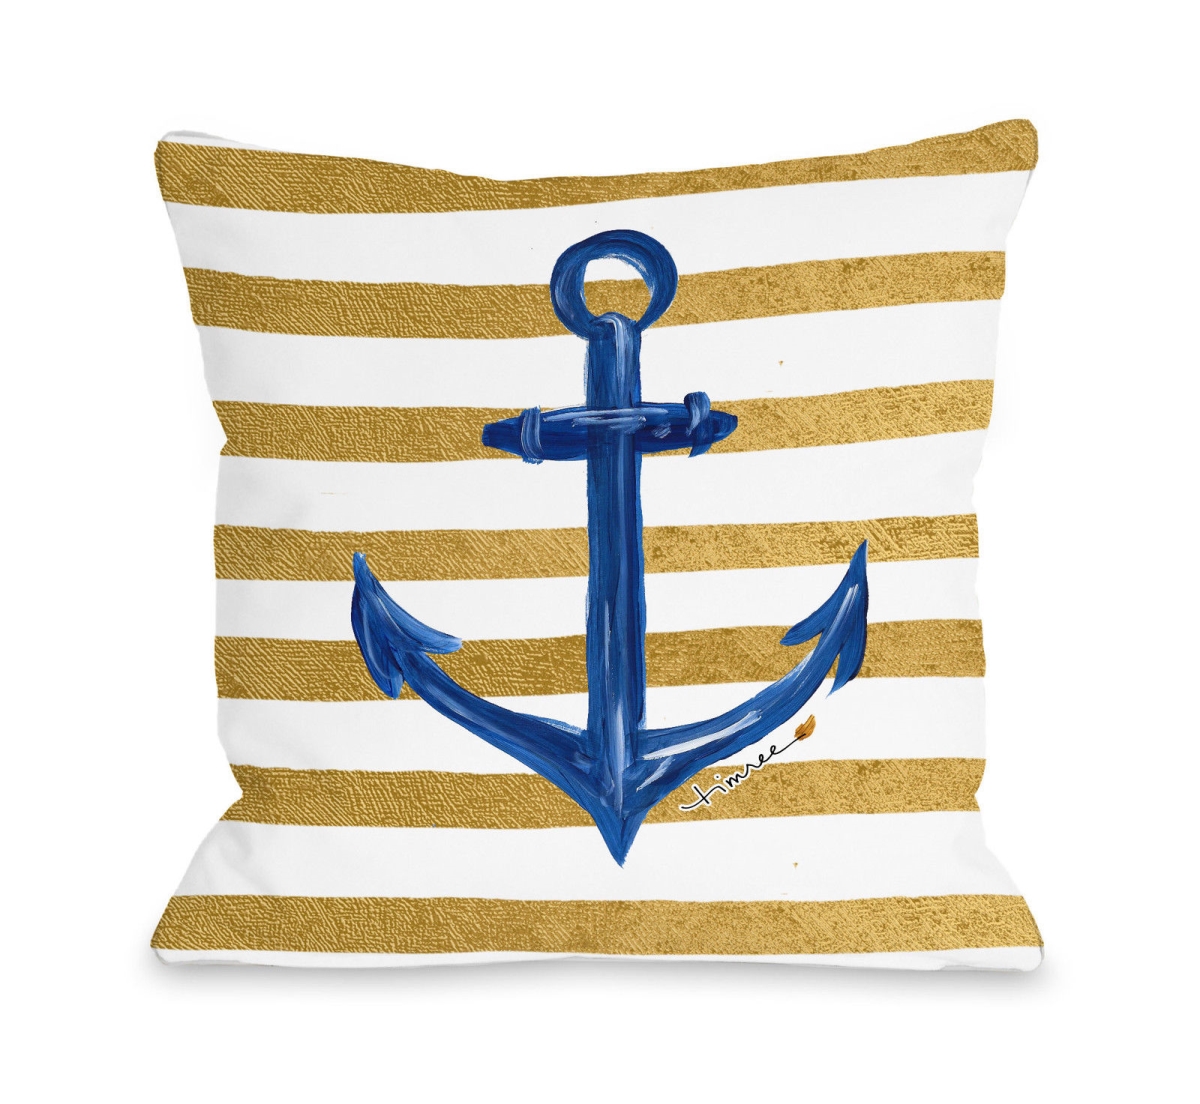 18 X 18 In. Anchor Gold Stripes Pillow By Timree - White, Gold & Blue